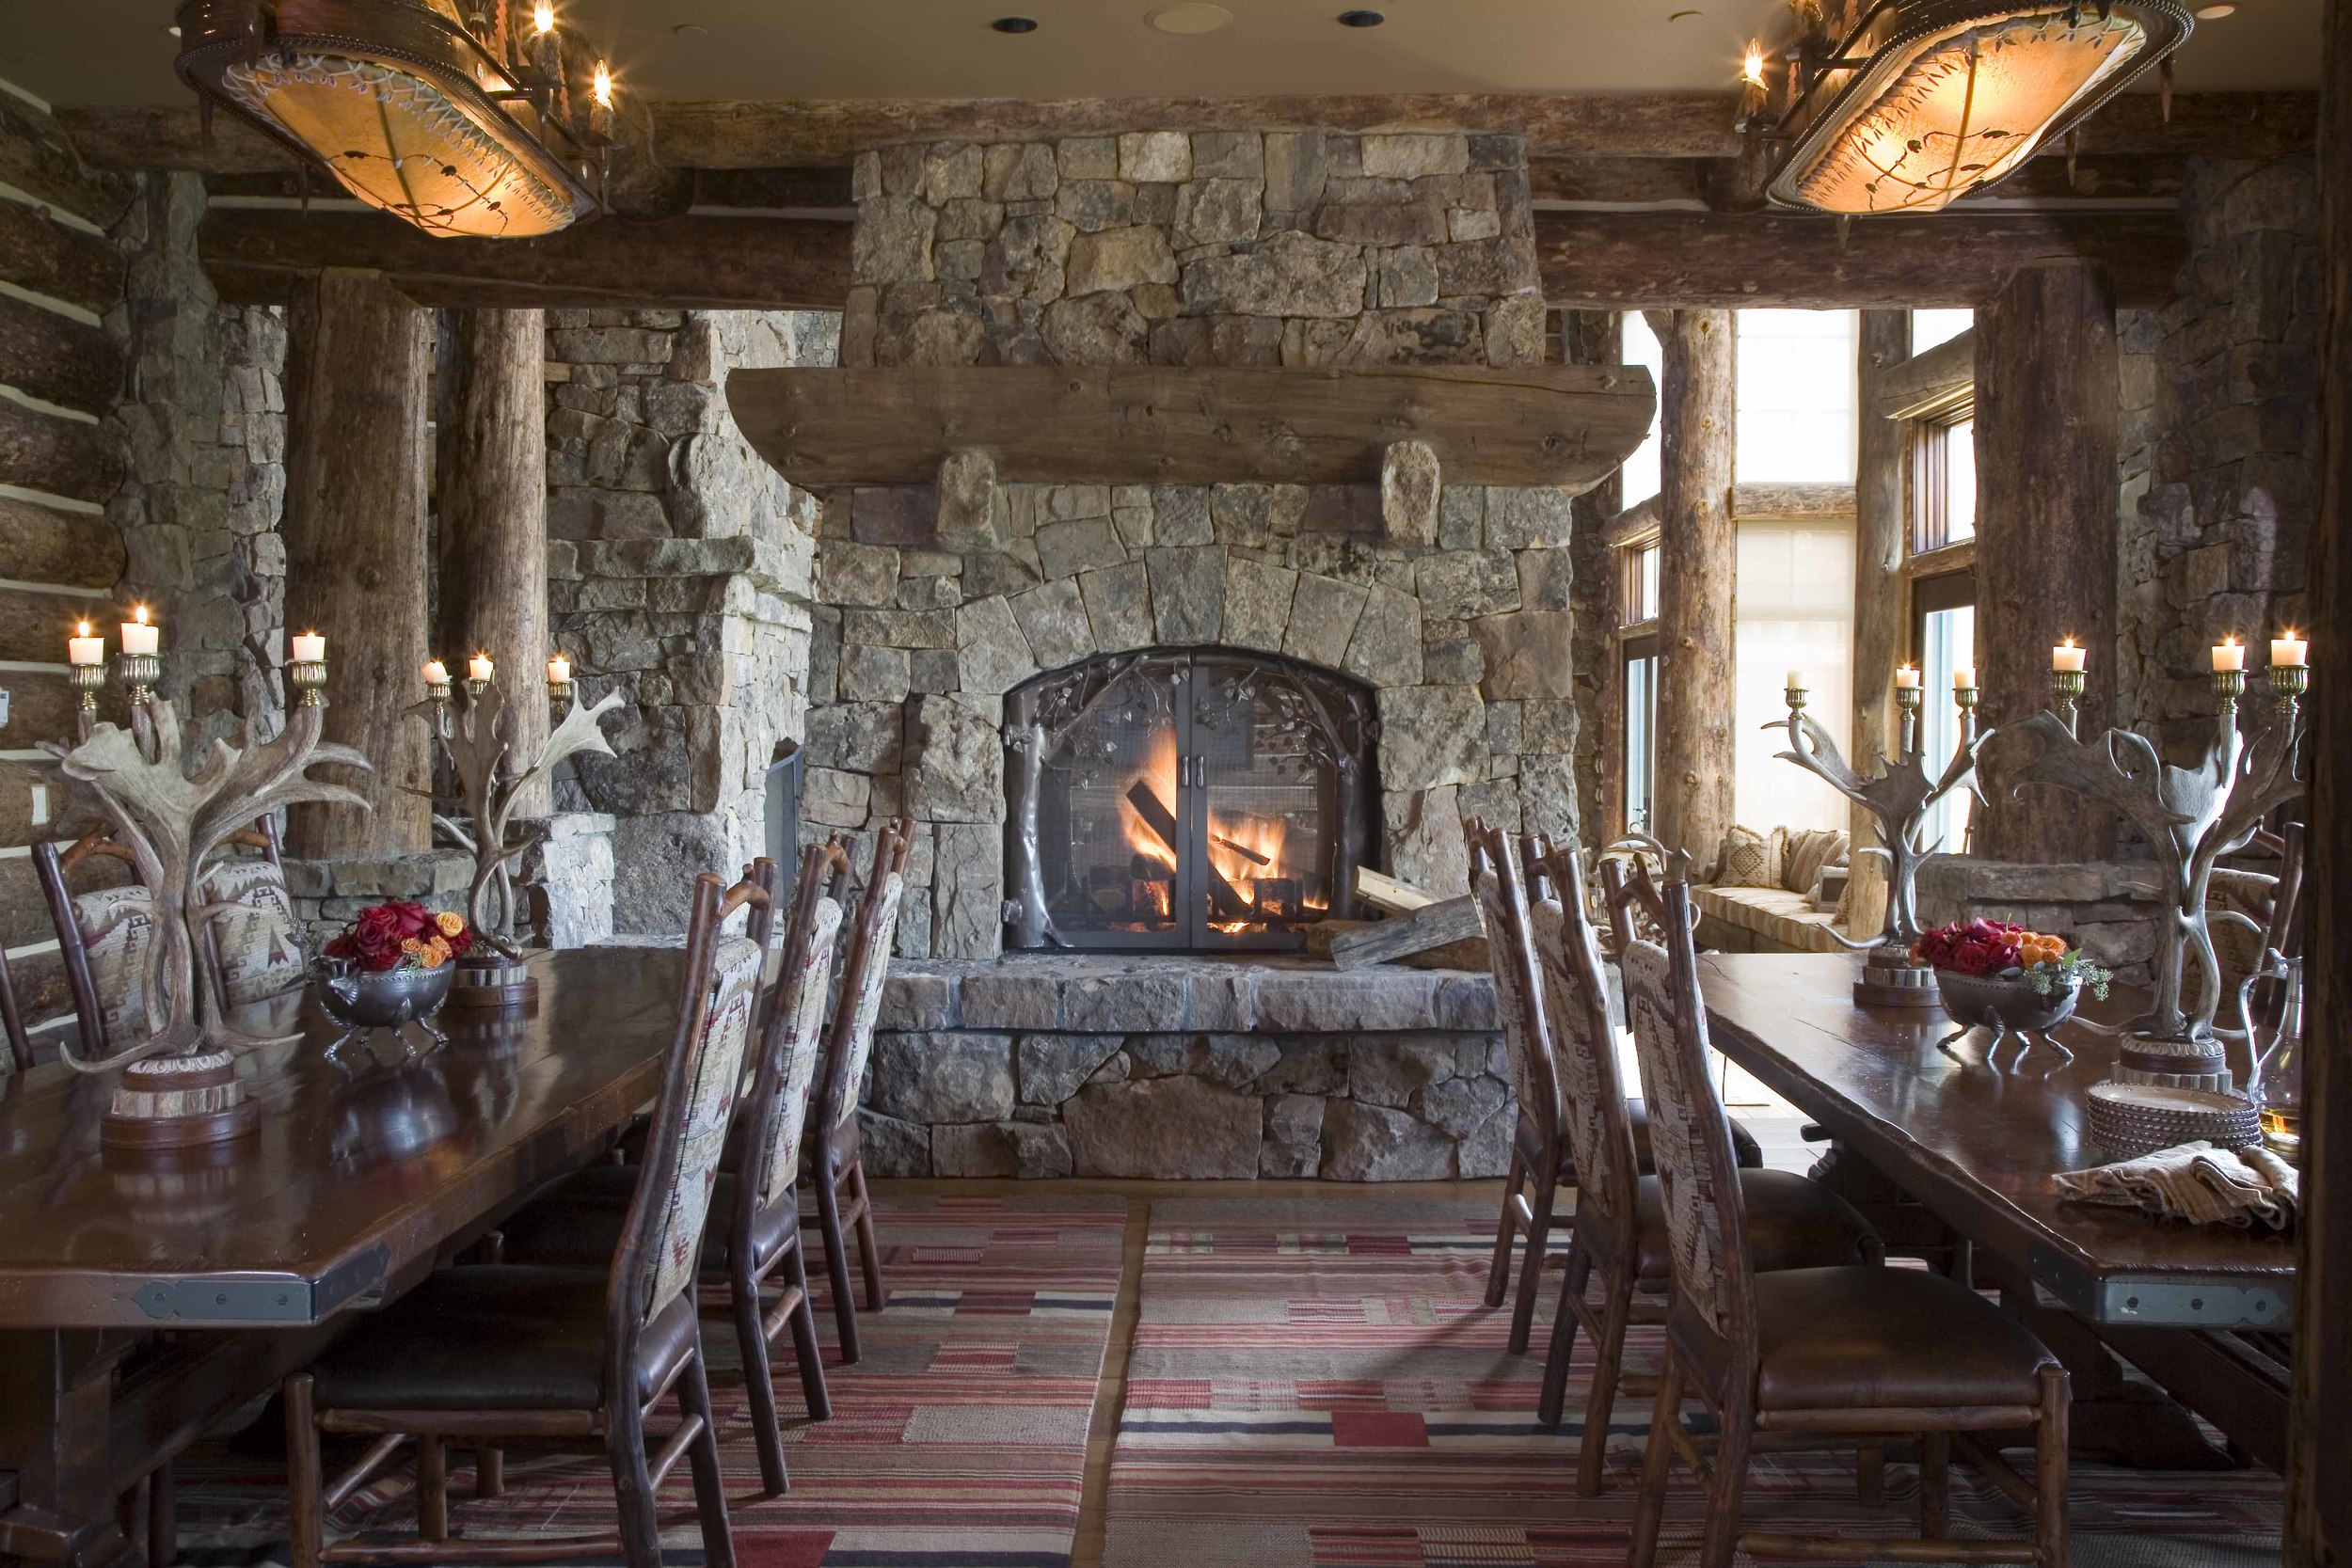 Ranch Dining Room With Gun Hanging From Wall